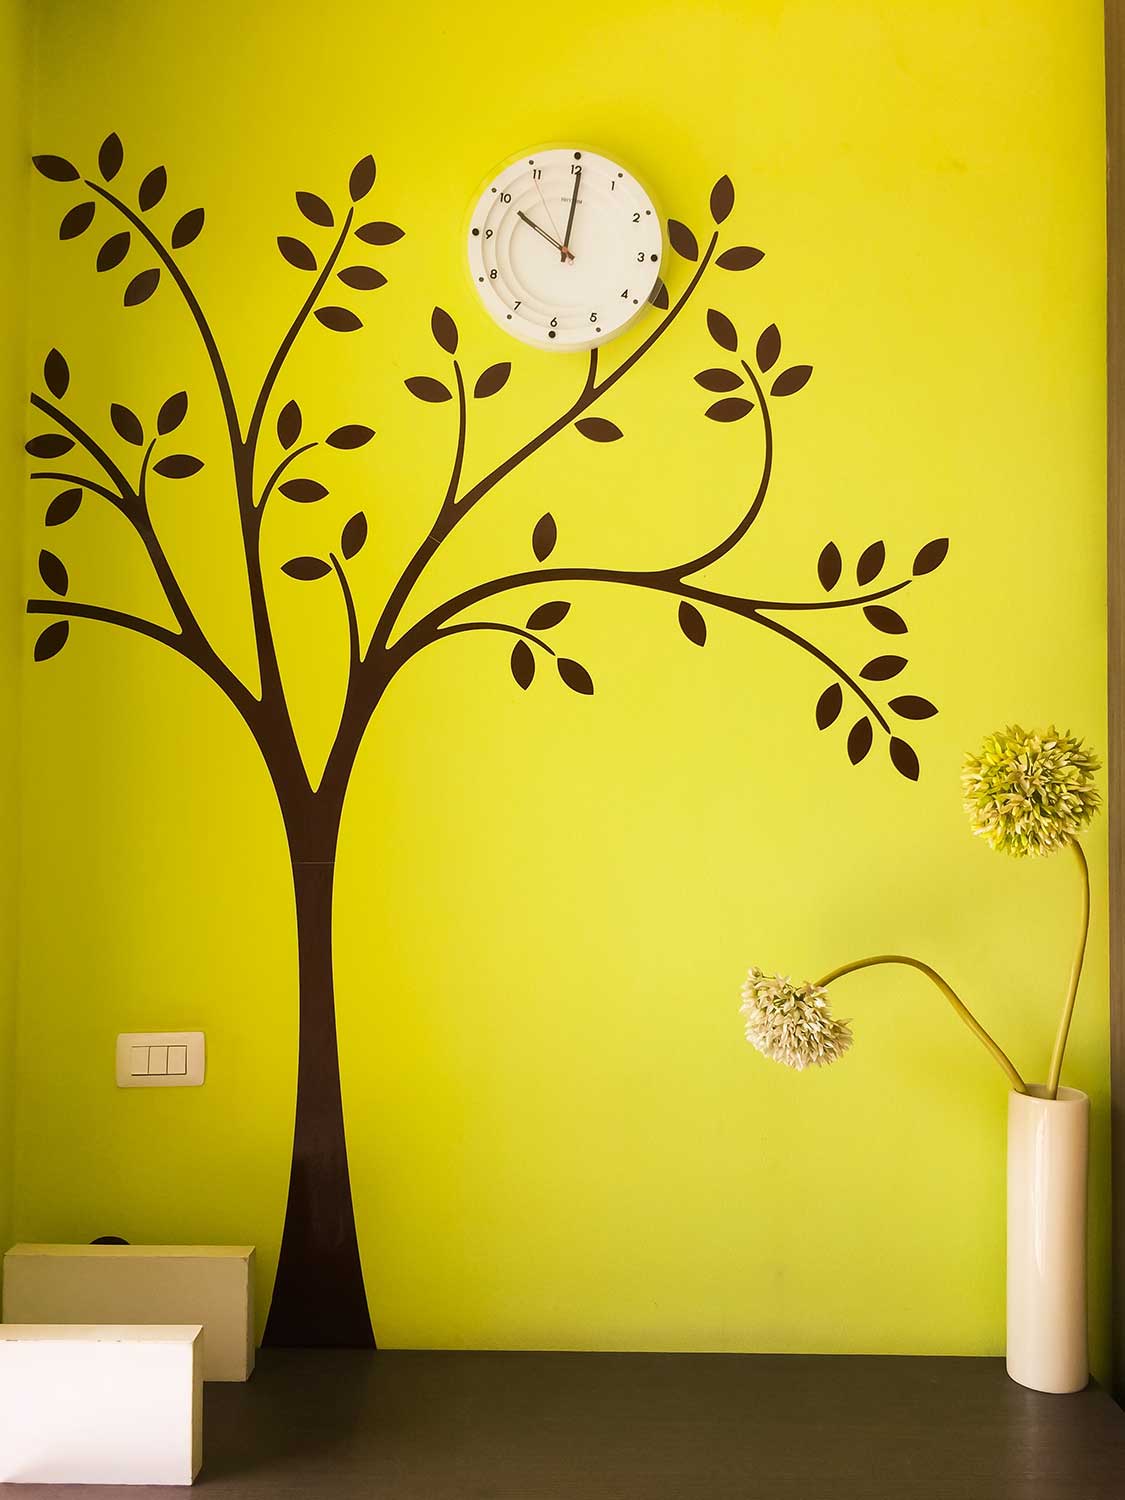 Green citron color wall with black tree wall decal and wall clock